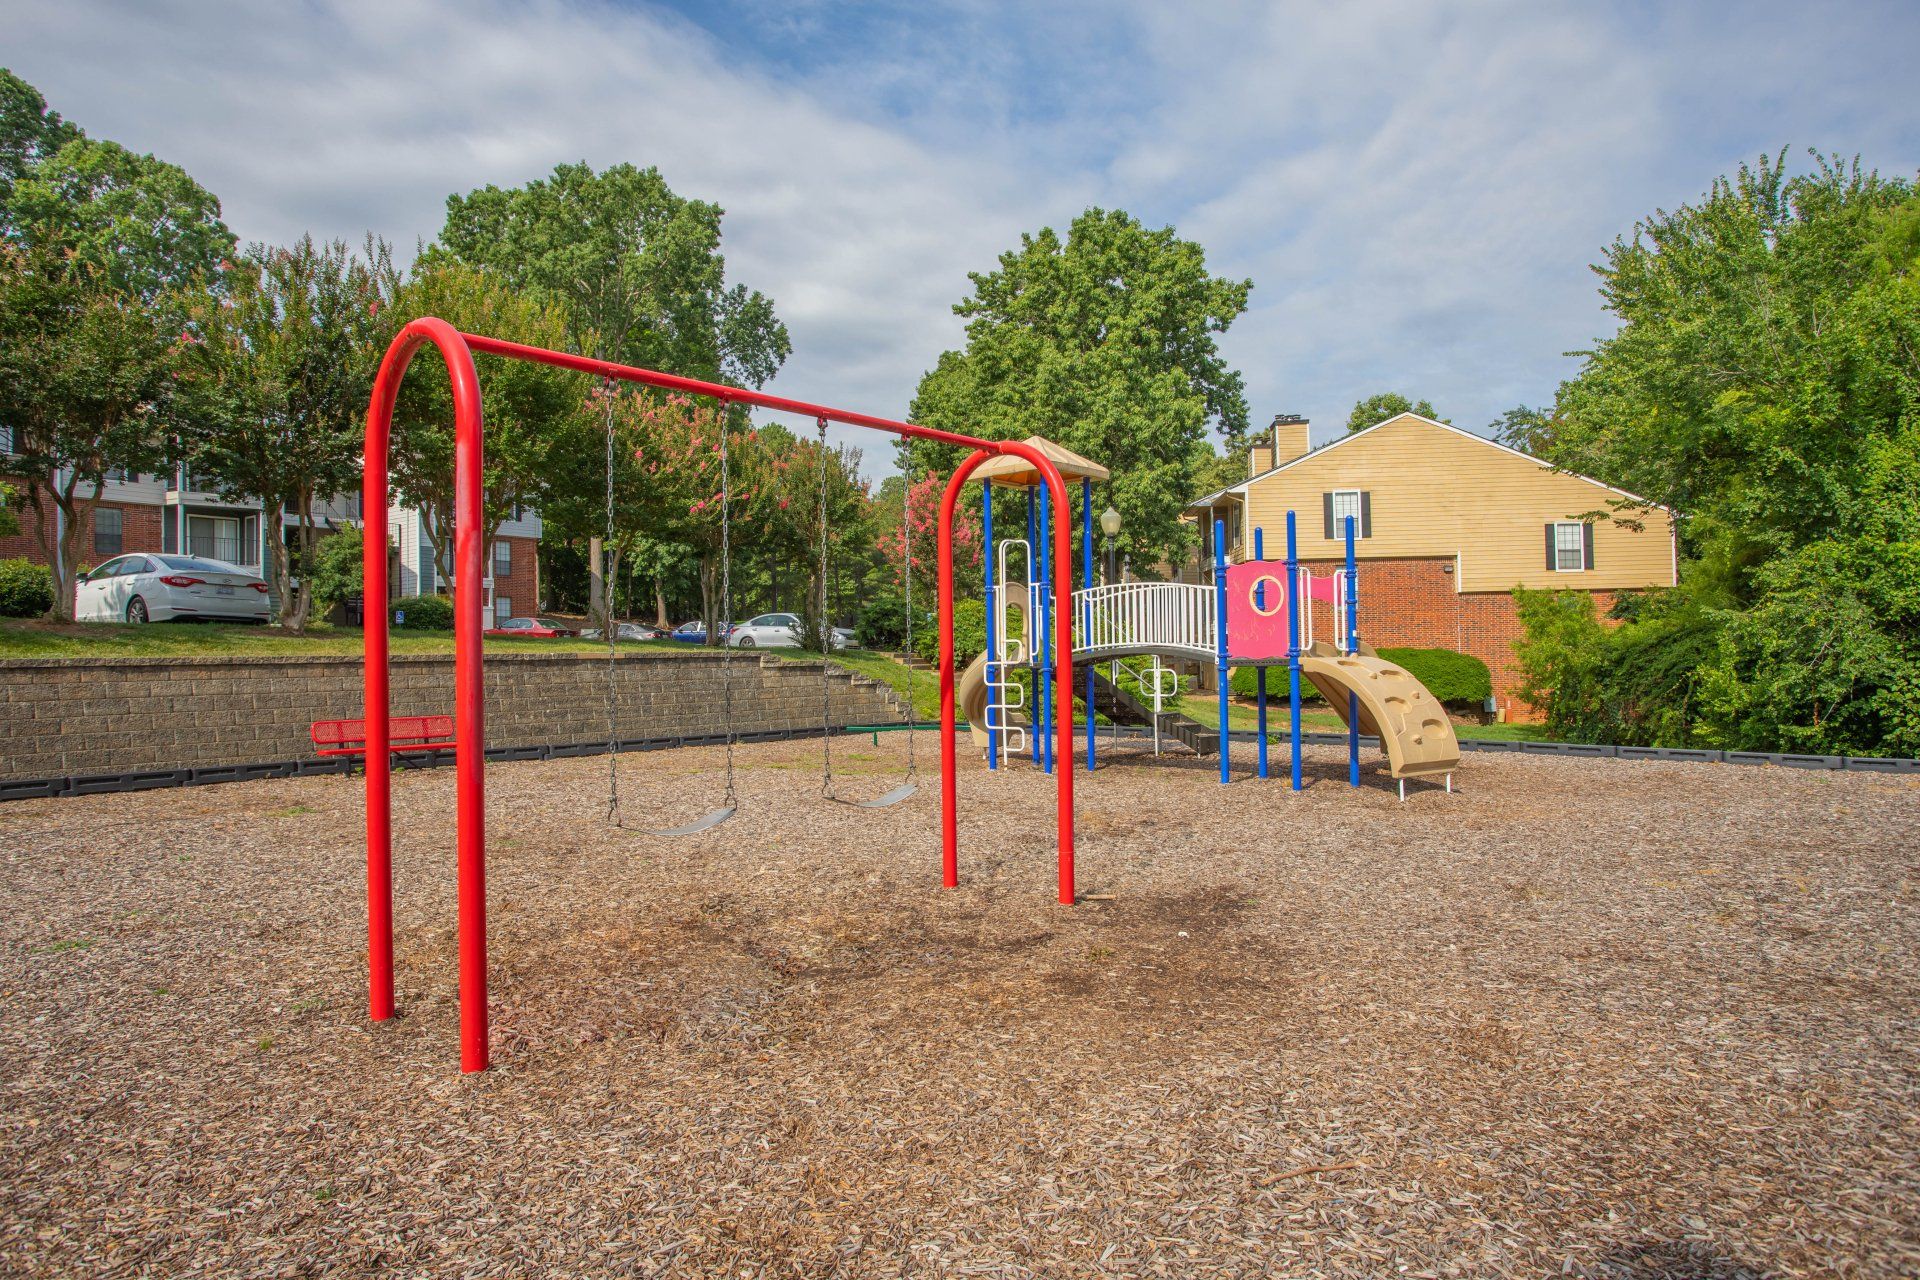 A playground with a red swing set and a blue slide at Autumn Ridge.